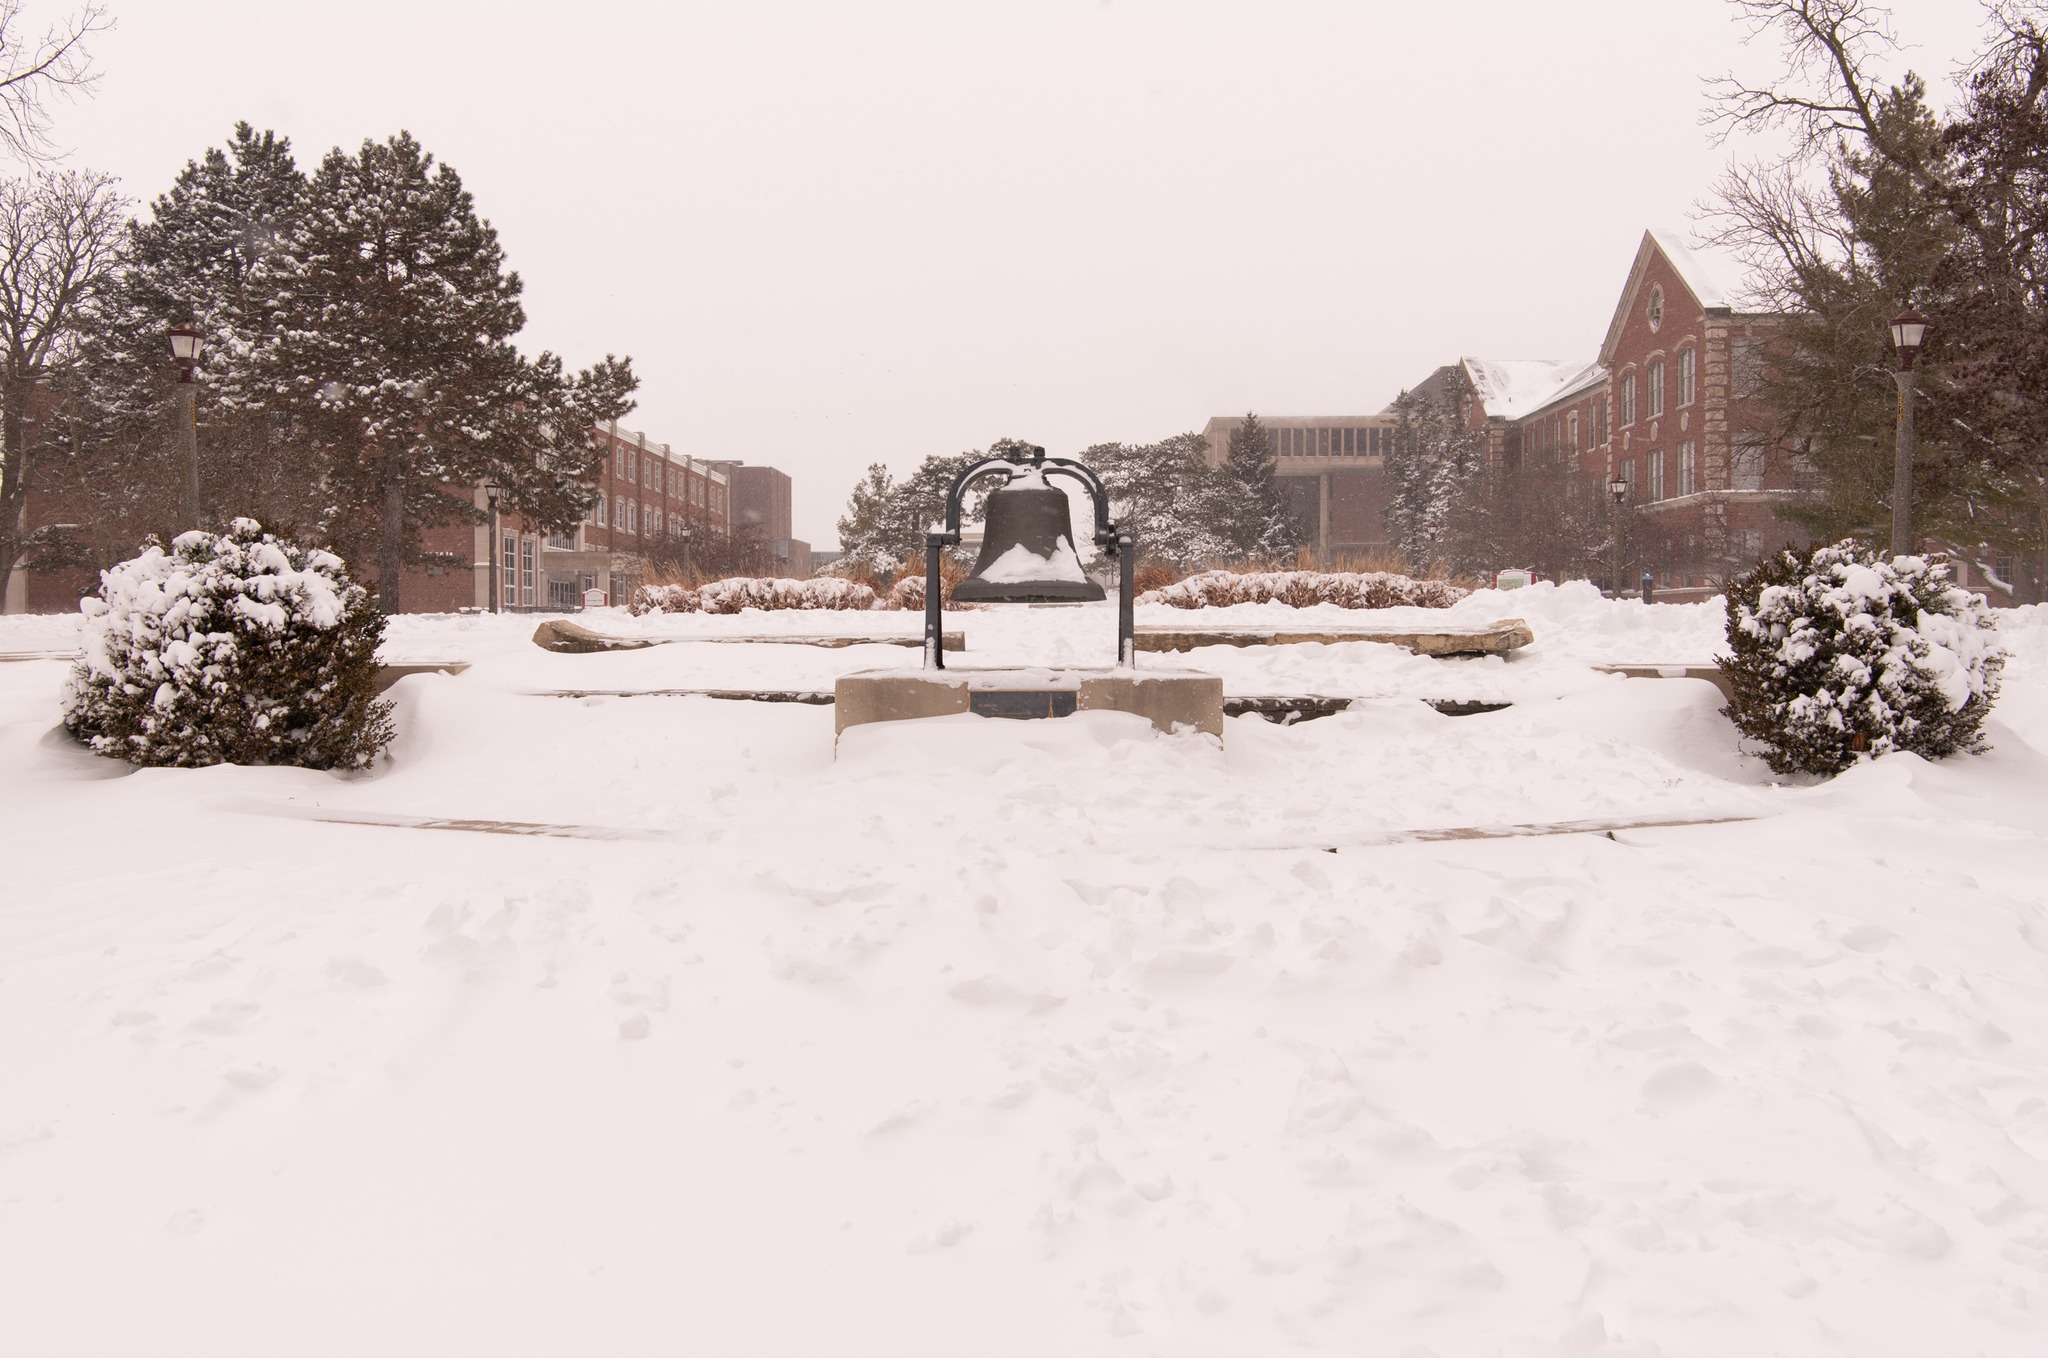 Snow covers the Old Main Bell on the ISU quad